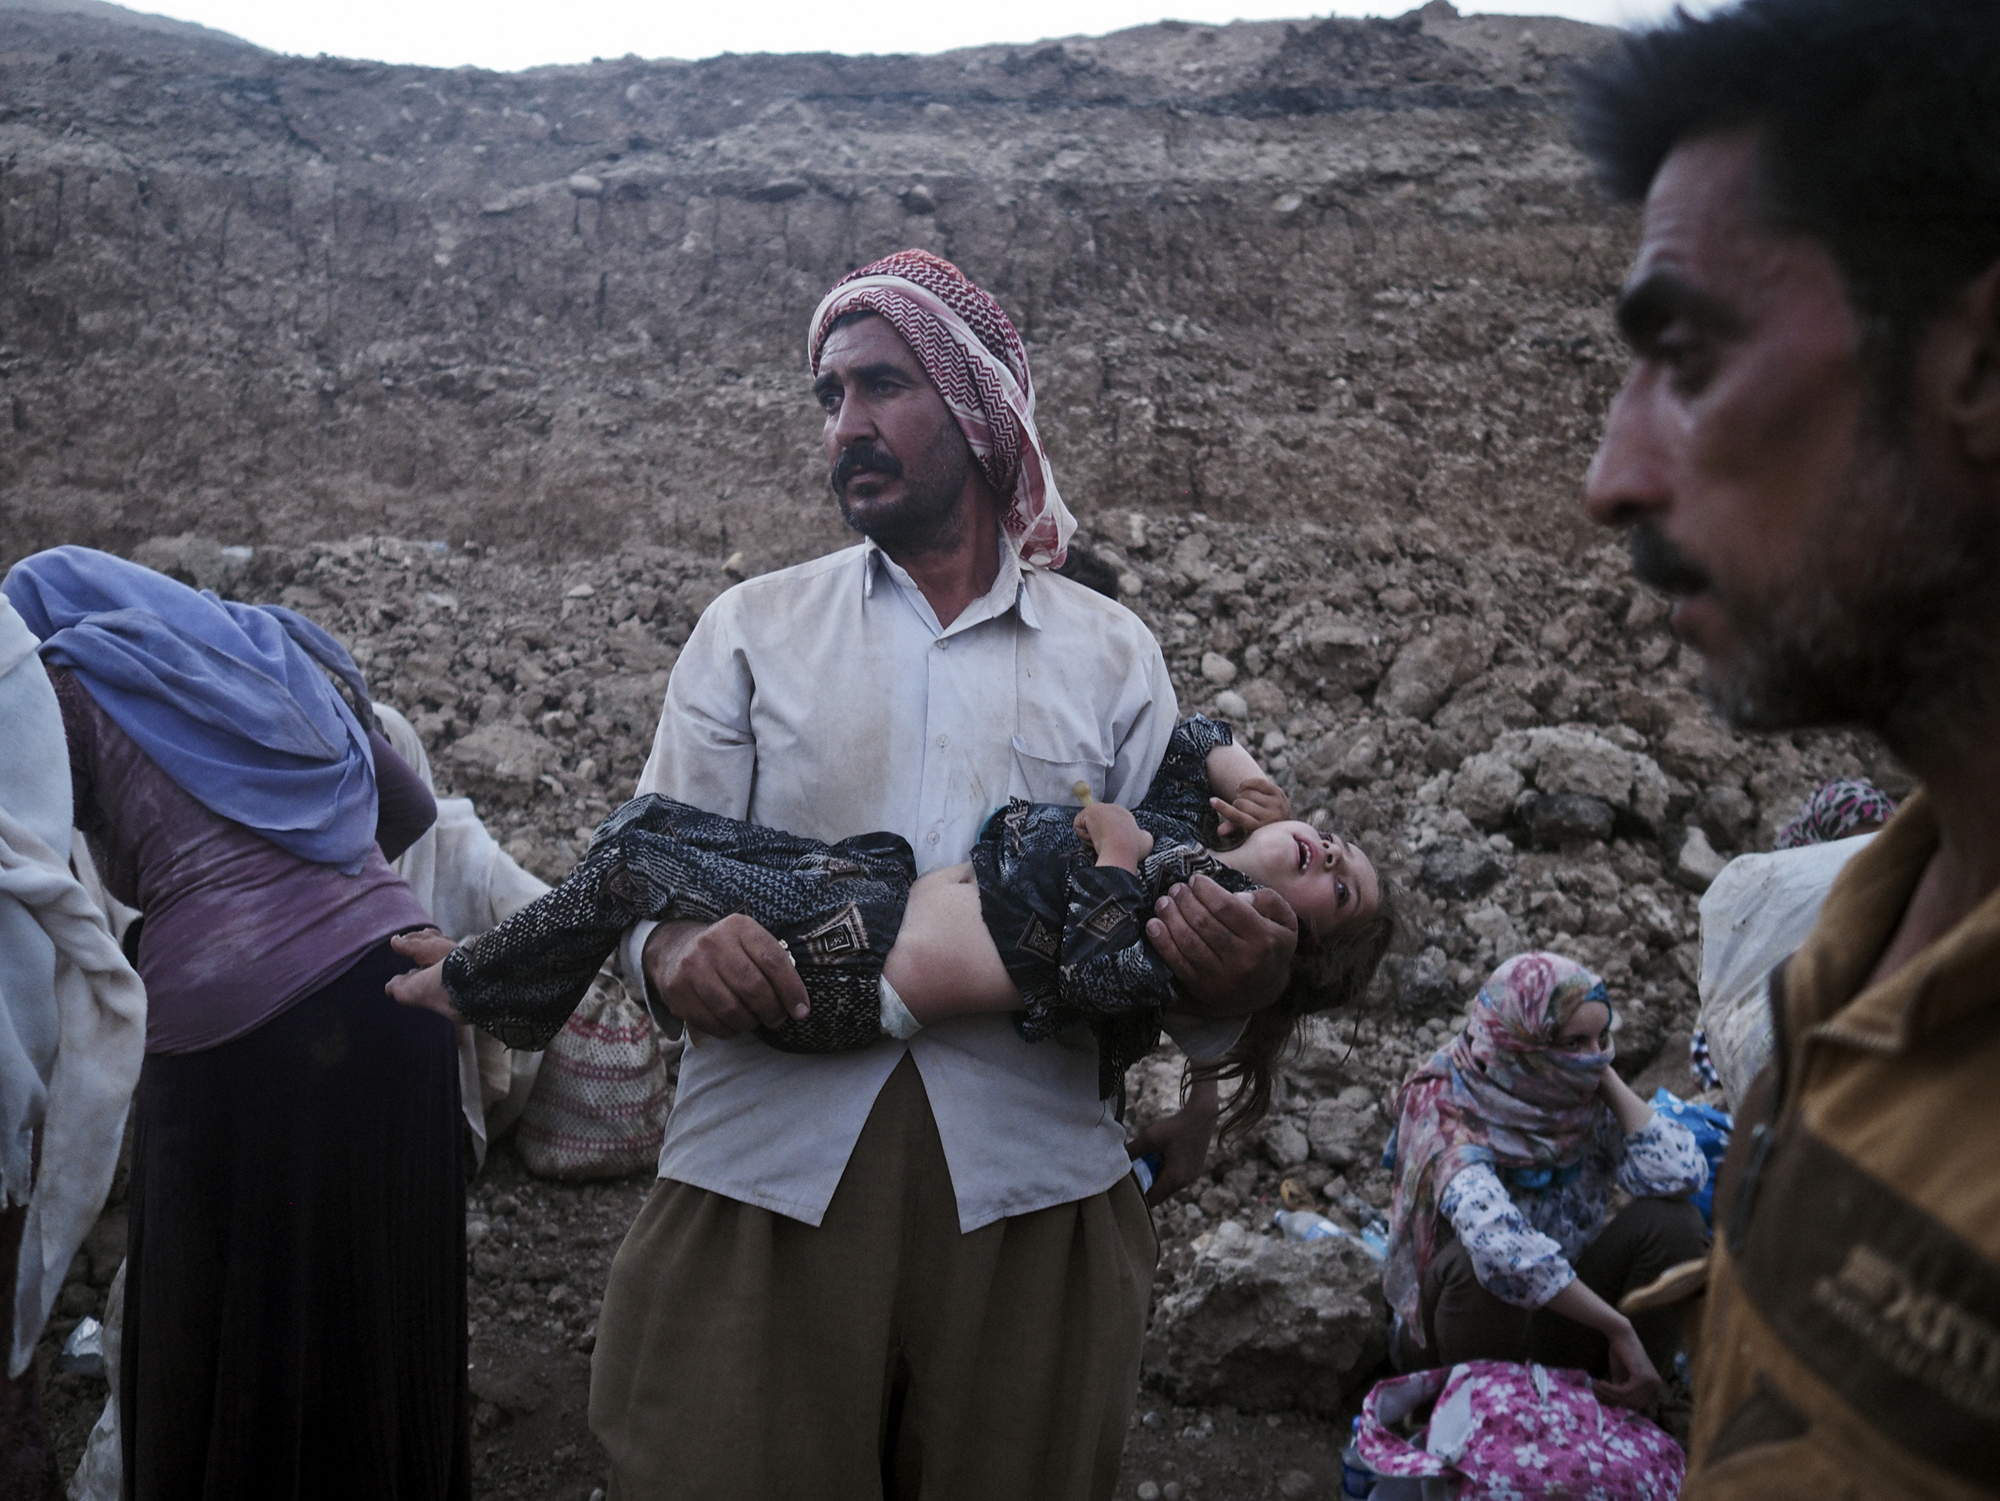 A Yazidi family from Sinjar arrive at the Fishkhabur border crossing between Iraq's Dohuk Province and Syria, Aug. 10, 2014.